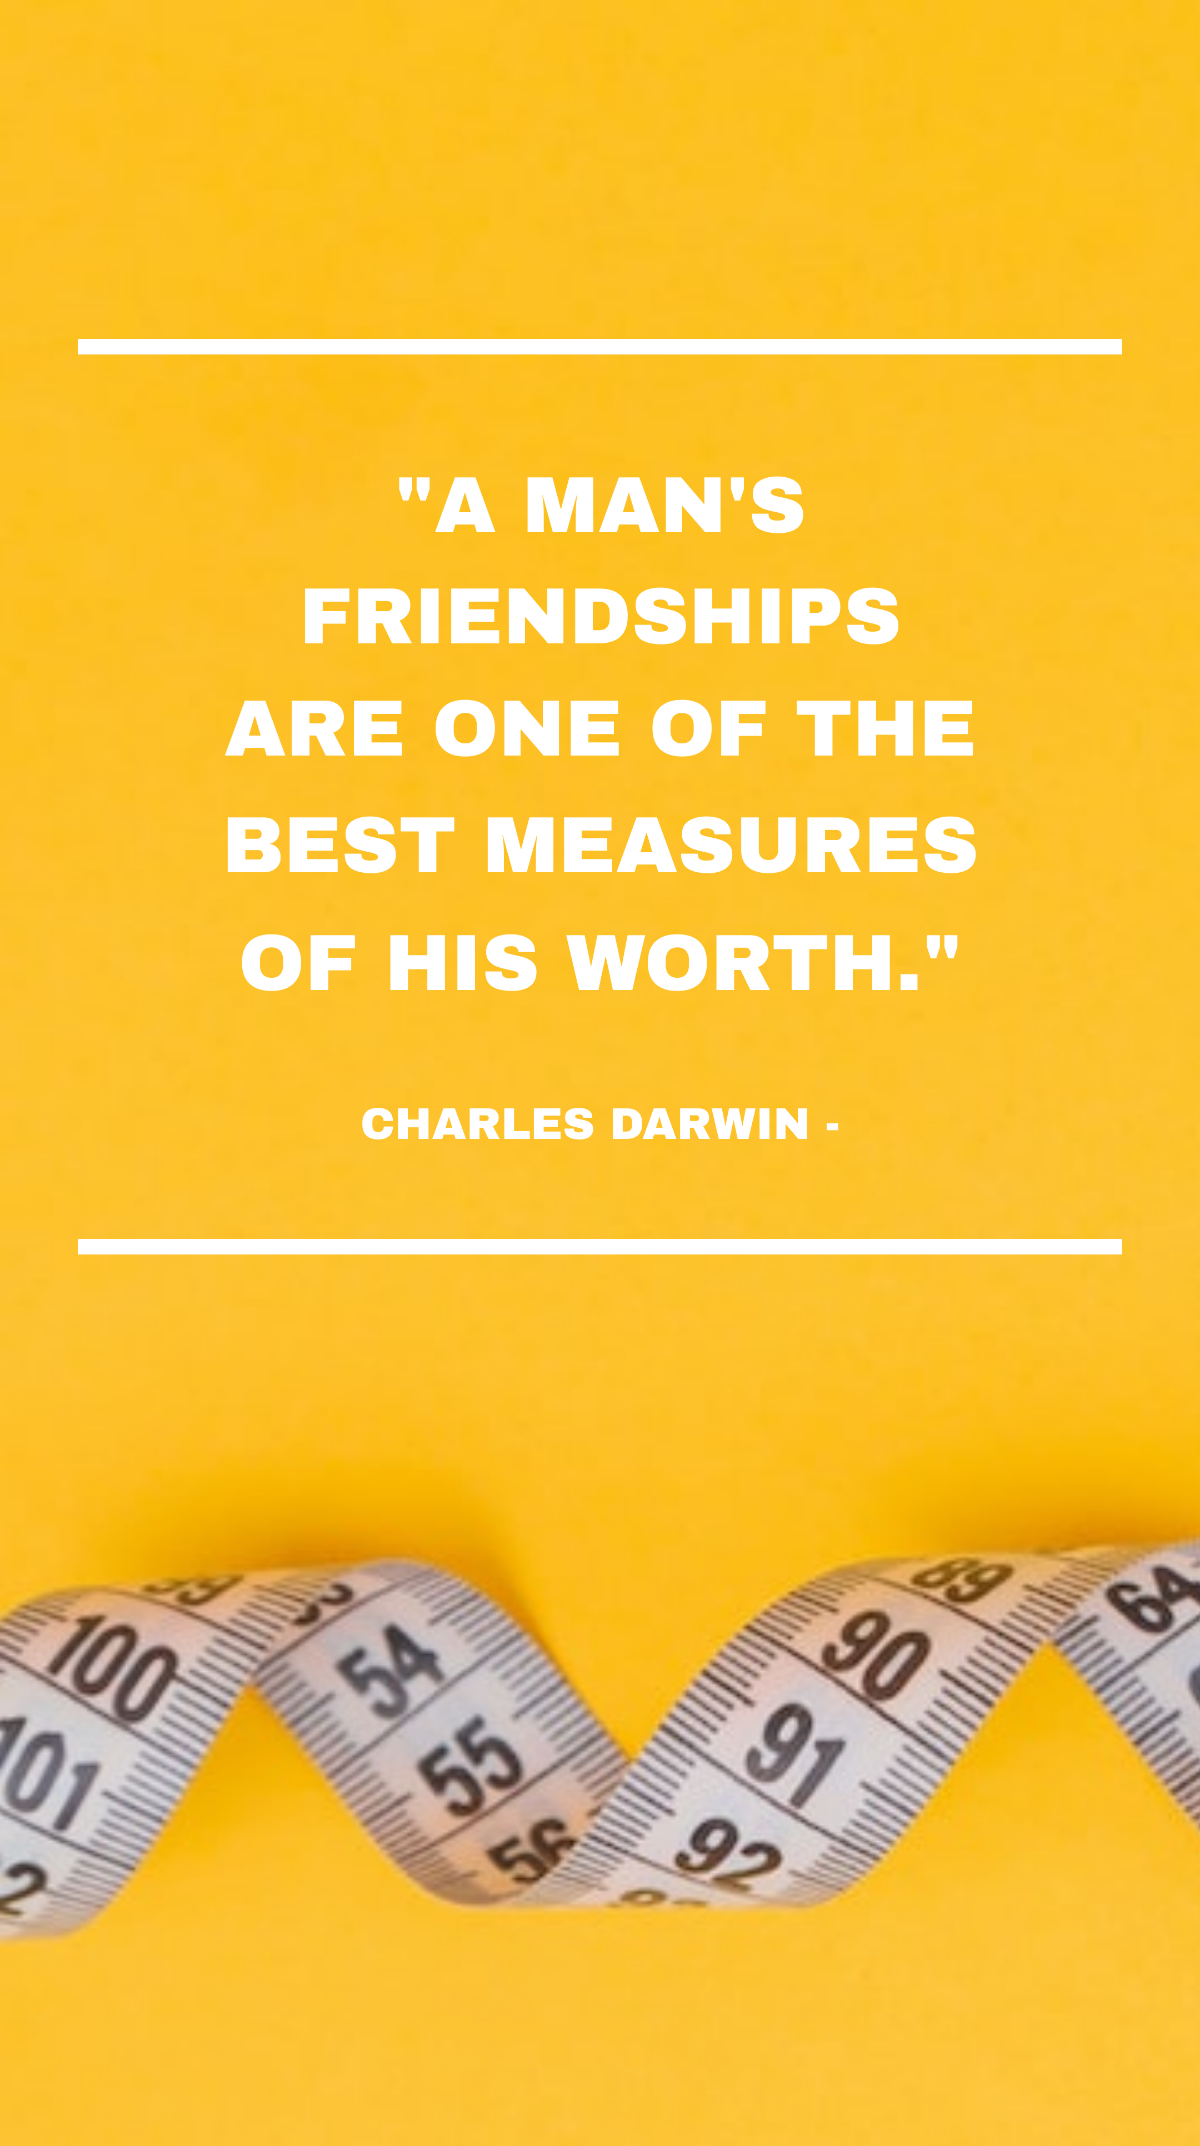 Charles Darwin - A man's friendships are one of the best measures of his worth. Template